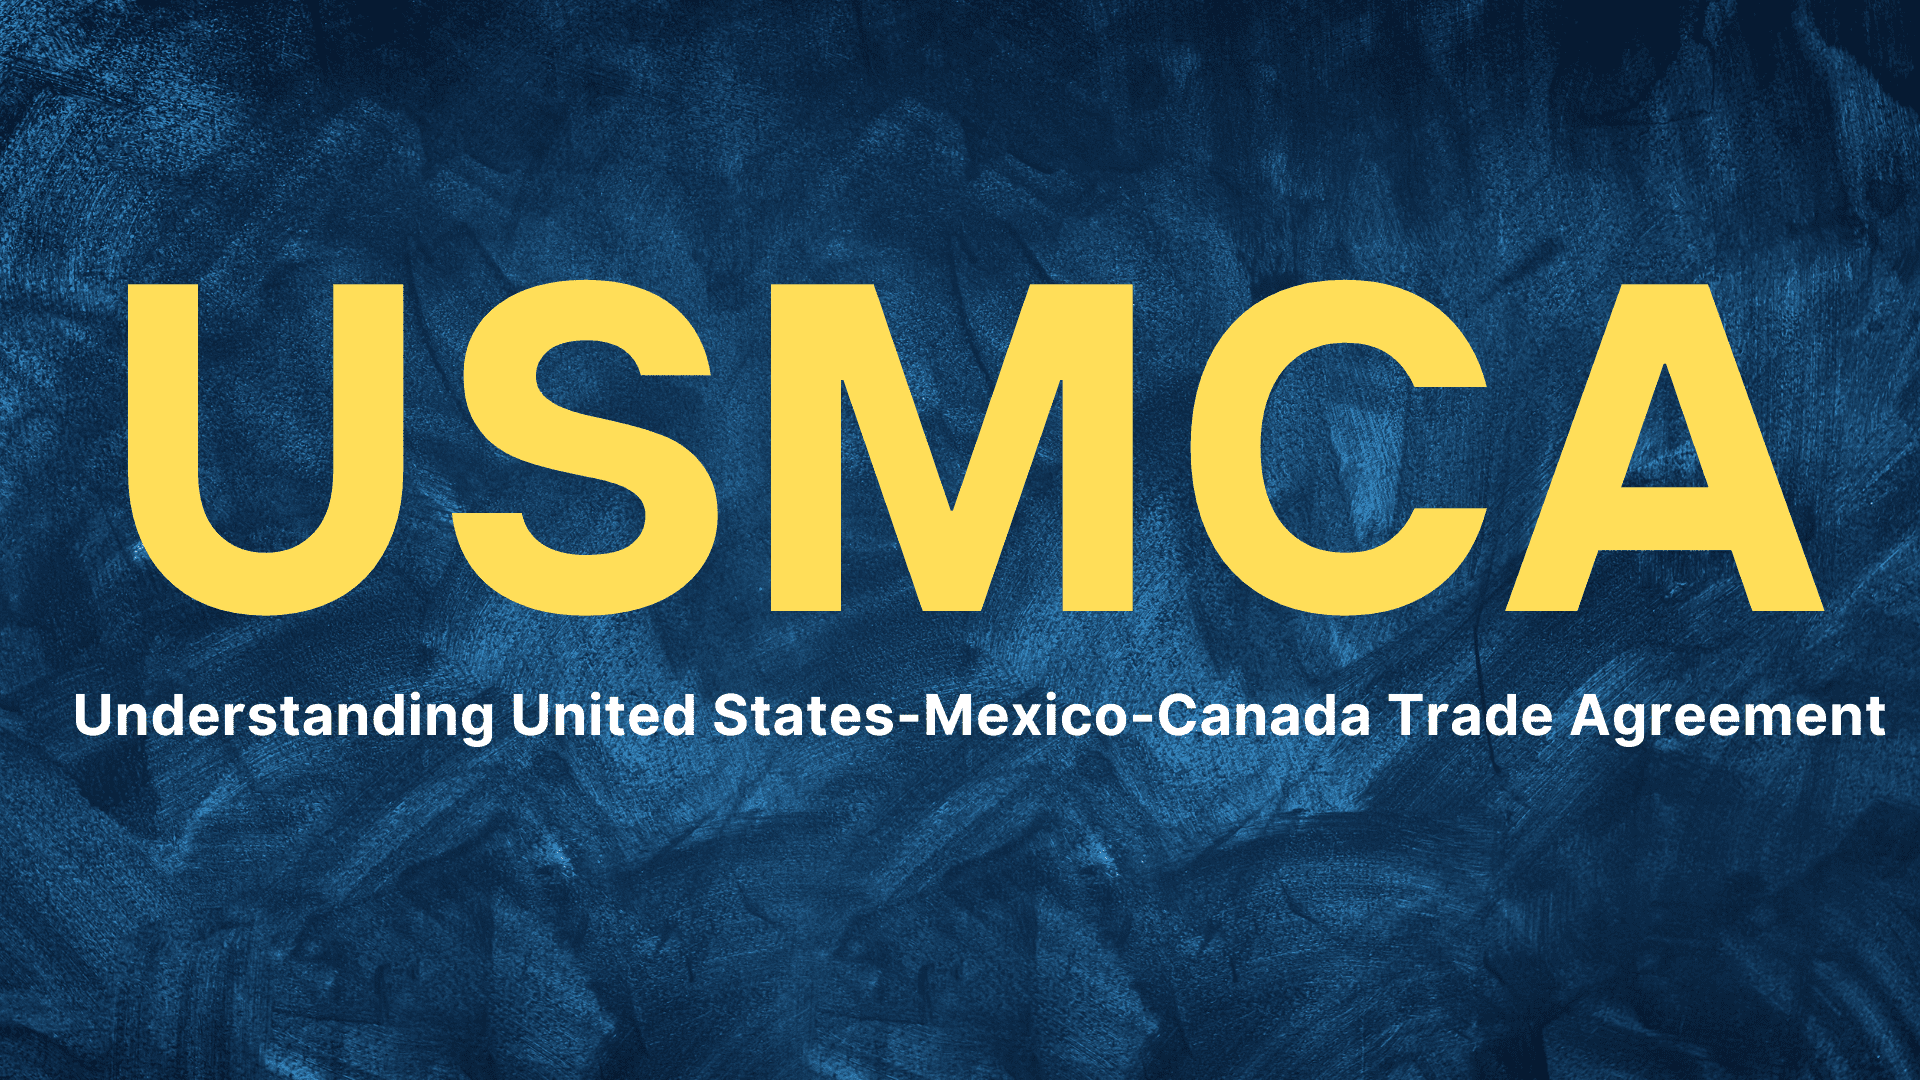 Understanding the USMCA: United States-Mexico-Canada Trade Agreement